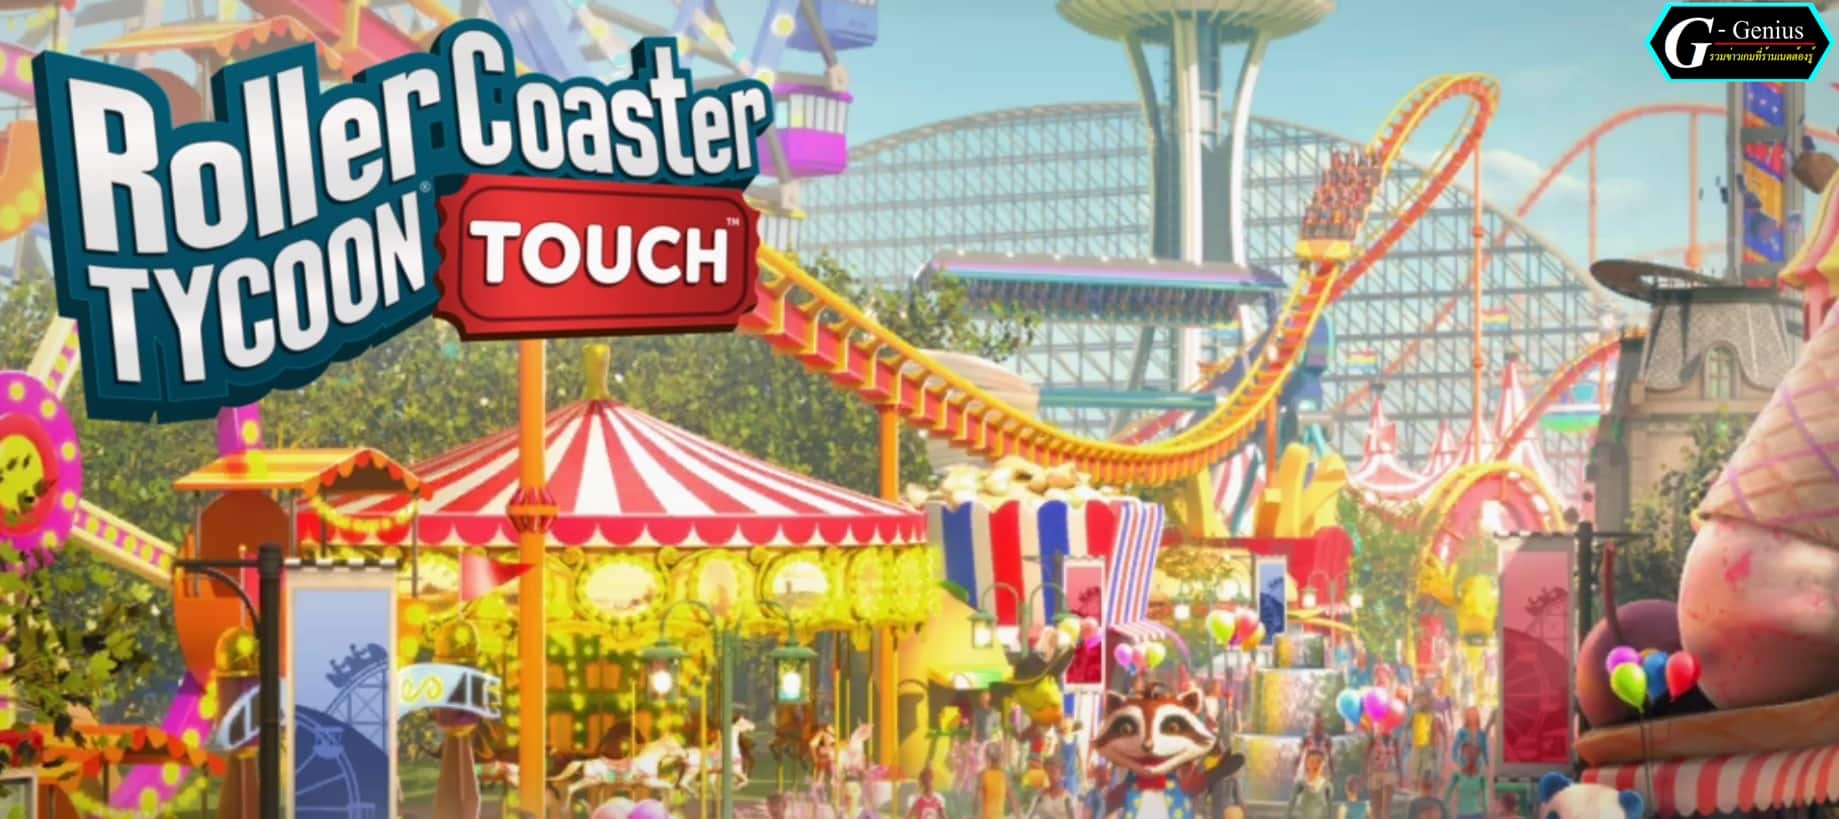 (Review Mobile Game) RollerCoaster Tycoon Touch : สร้างสวนสนุกในมือคุณแบบ 3D!